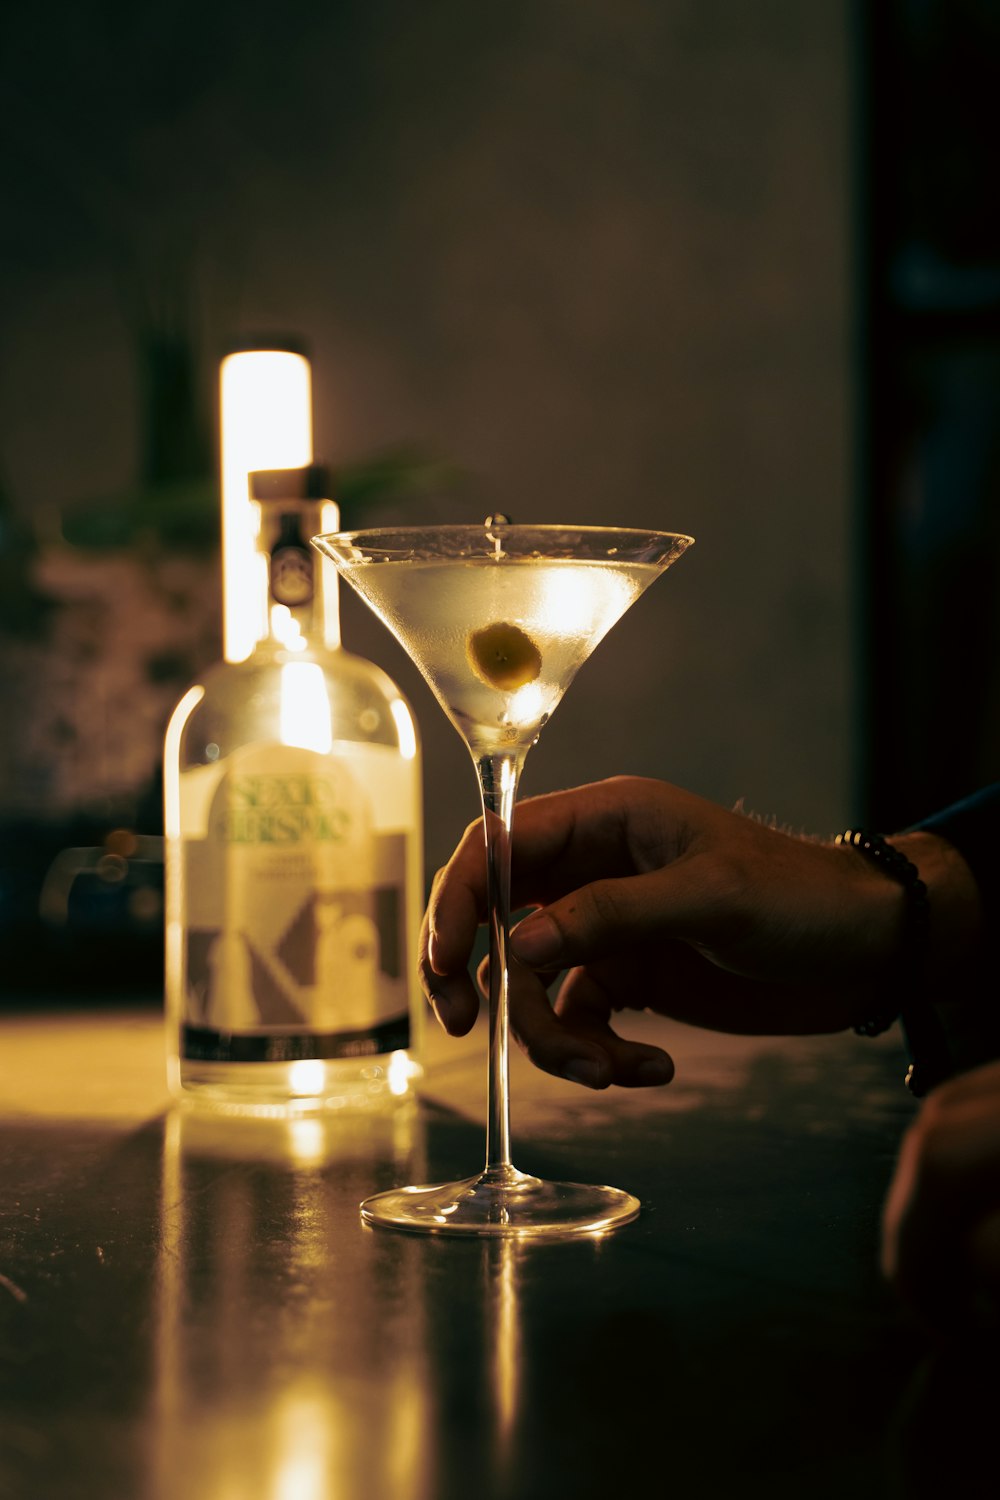 a person holding a martini glass in front of a bottle